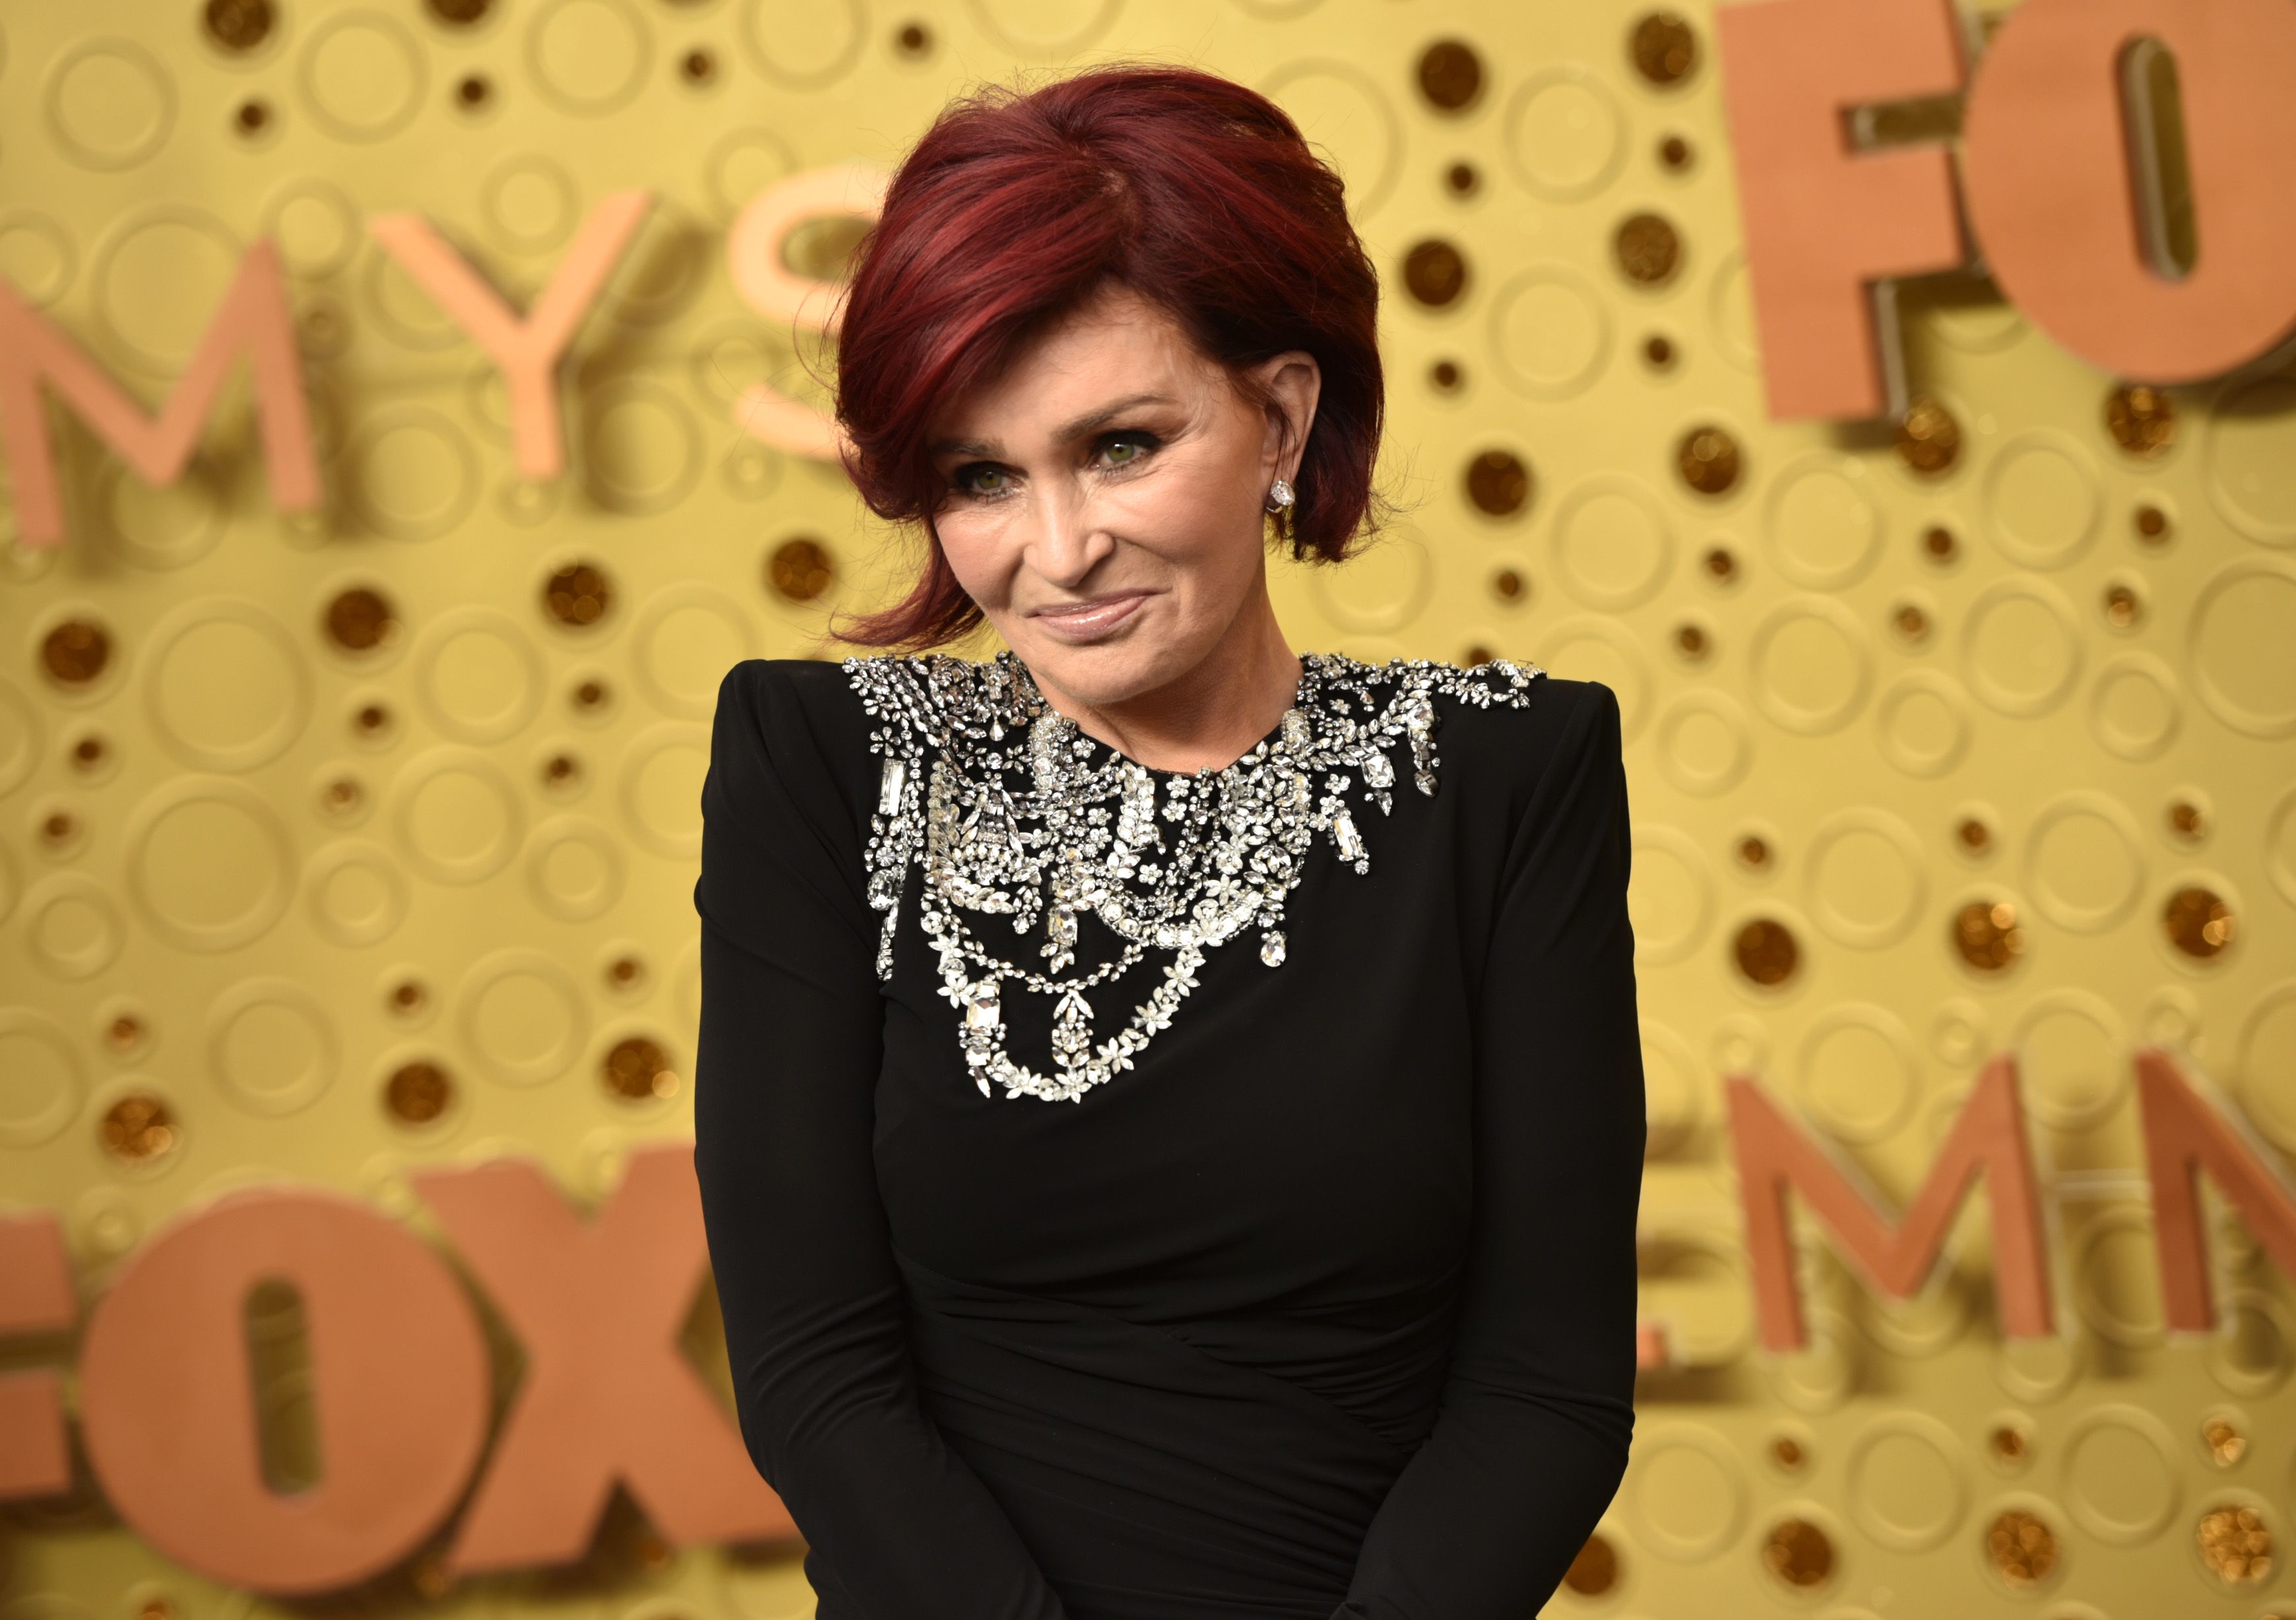  Sharon Osbourne at the 71st Emmy Awards at Microsoft Theater on September 22, 2019 | Getty Images